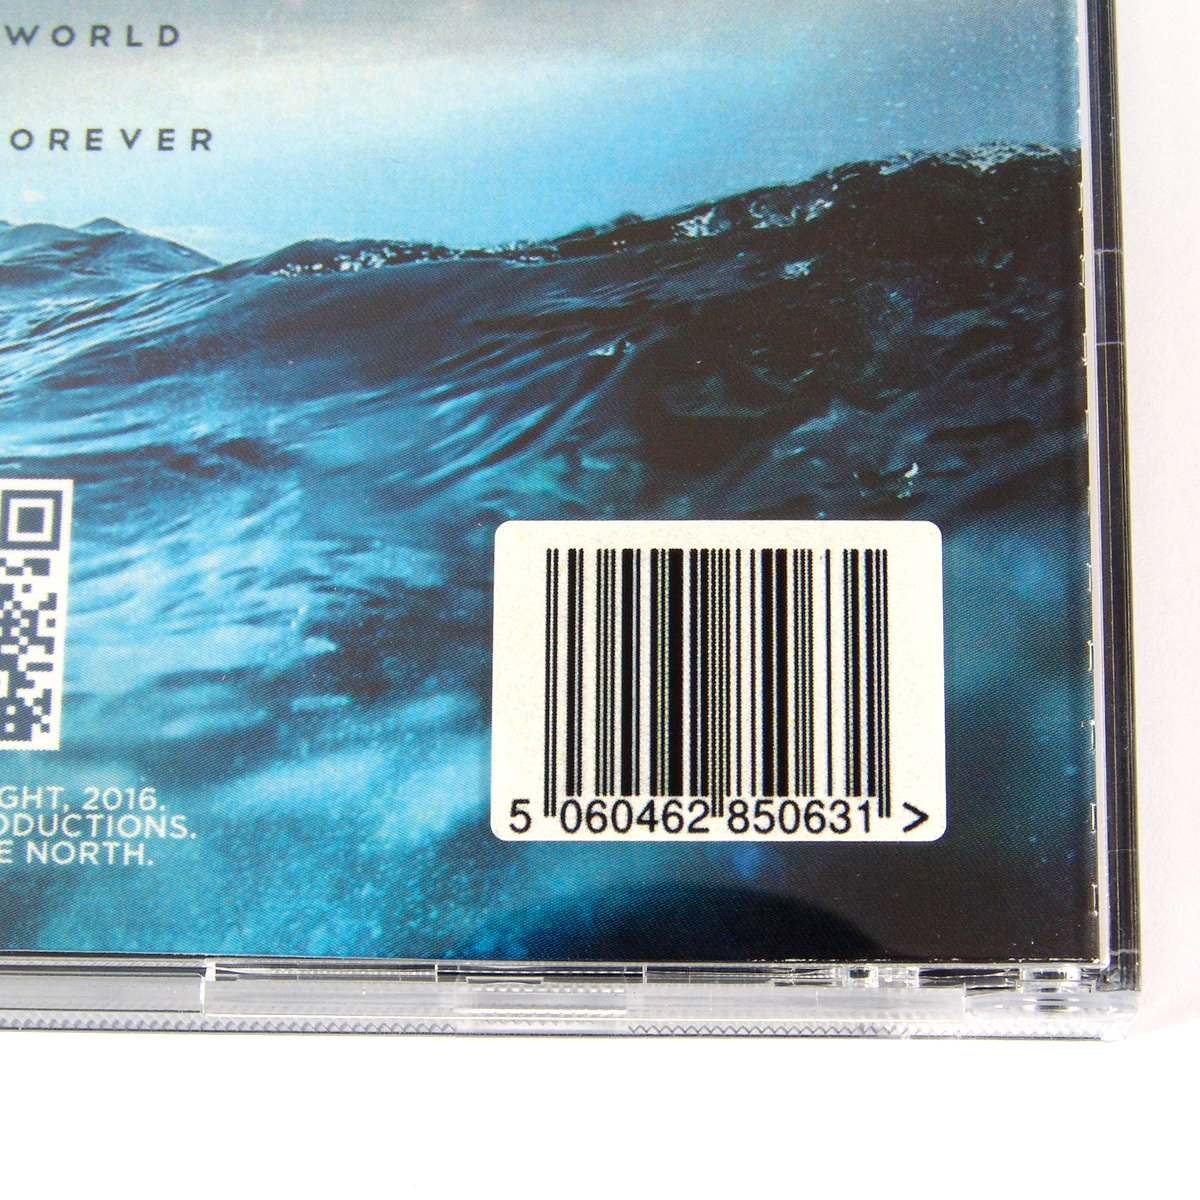 Custom printed barcode stickers for CDs, DVDs, cassette etc (1 sheet, 81  stickers) - Retro Style Media